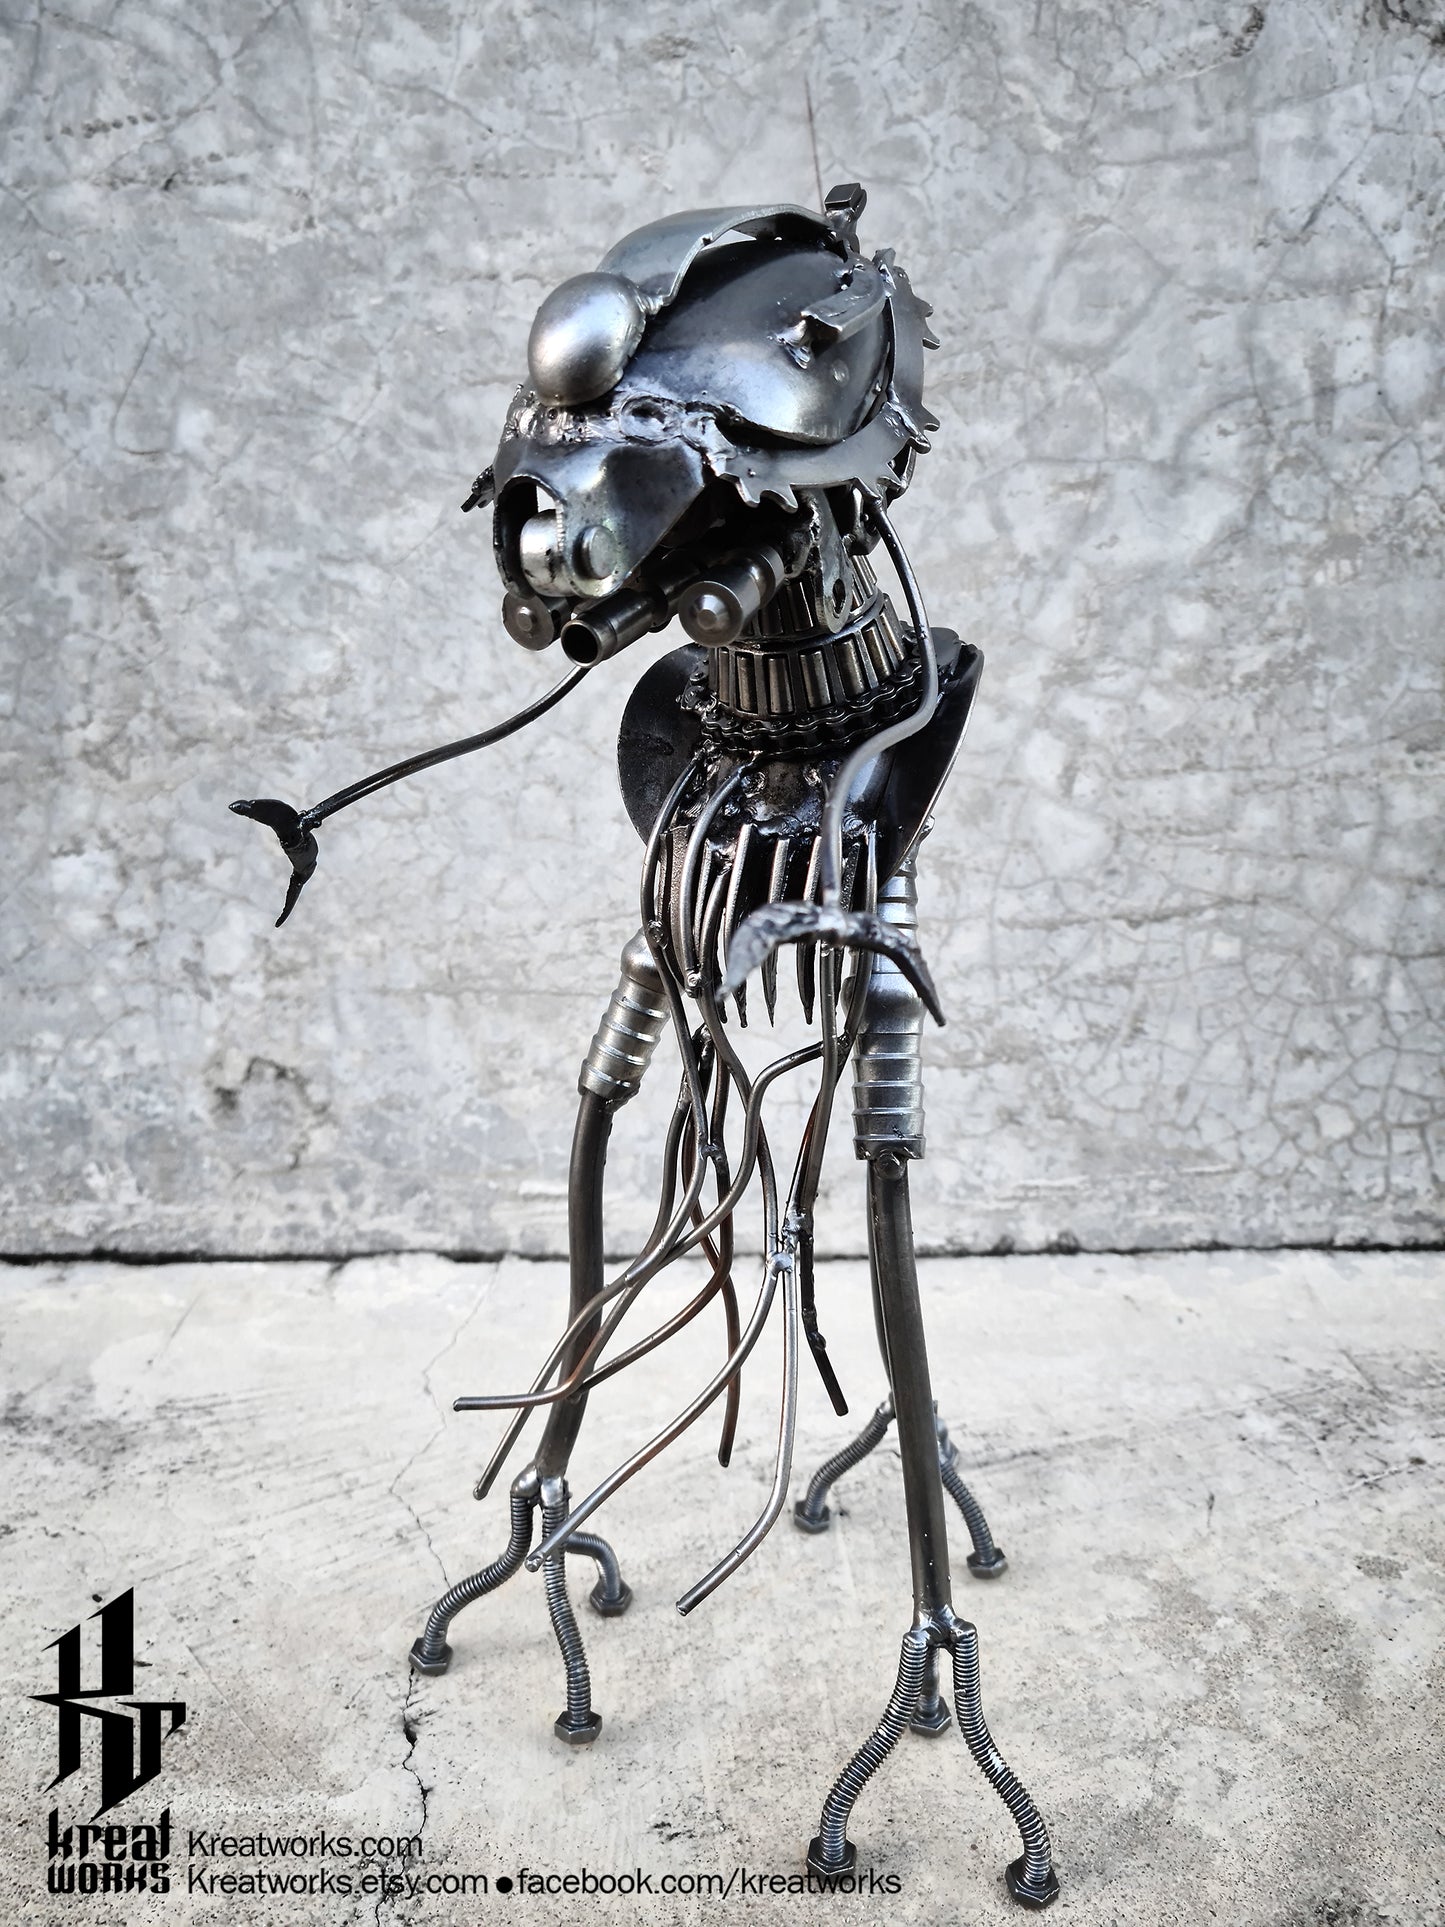 mini Steampunk Recycled Metal Alien Tripod / Recycle Metal Sustainable Sculpture Art